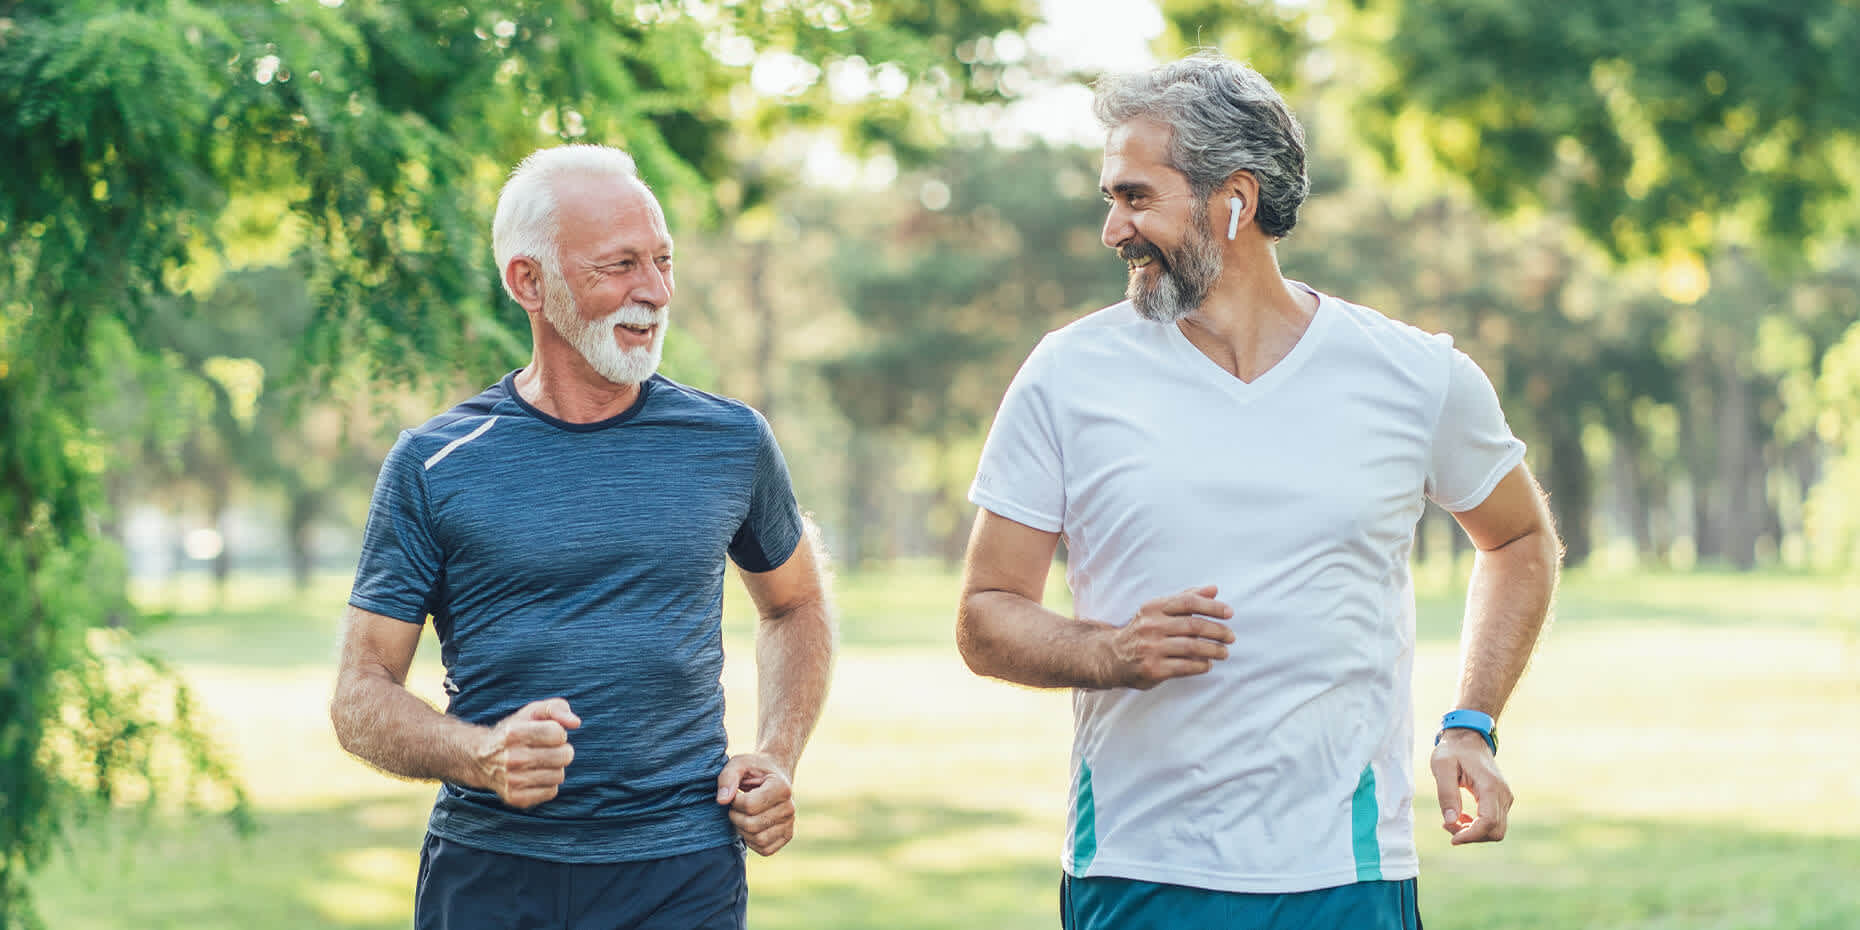 Men and Aging: Your Guide to Maintaining Health and Wellness